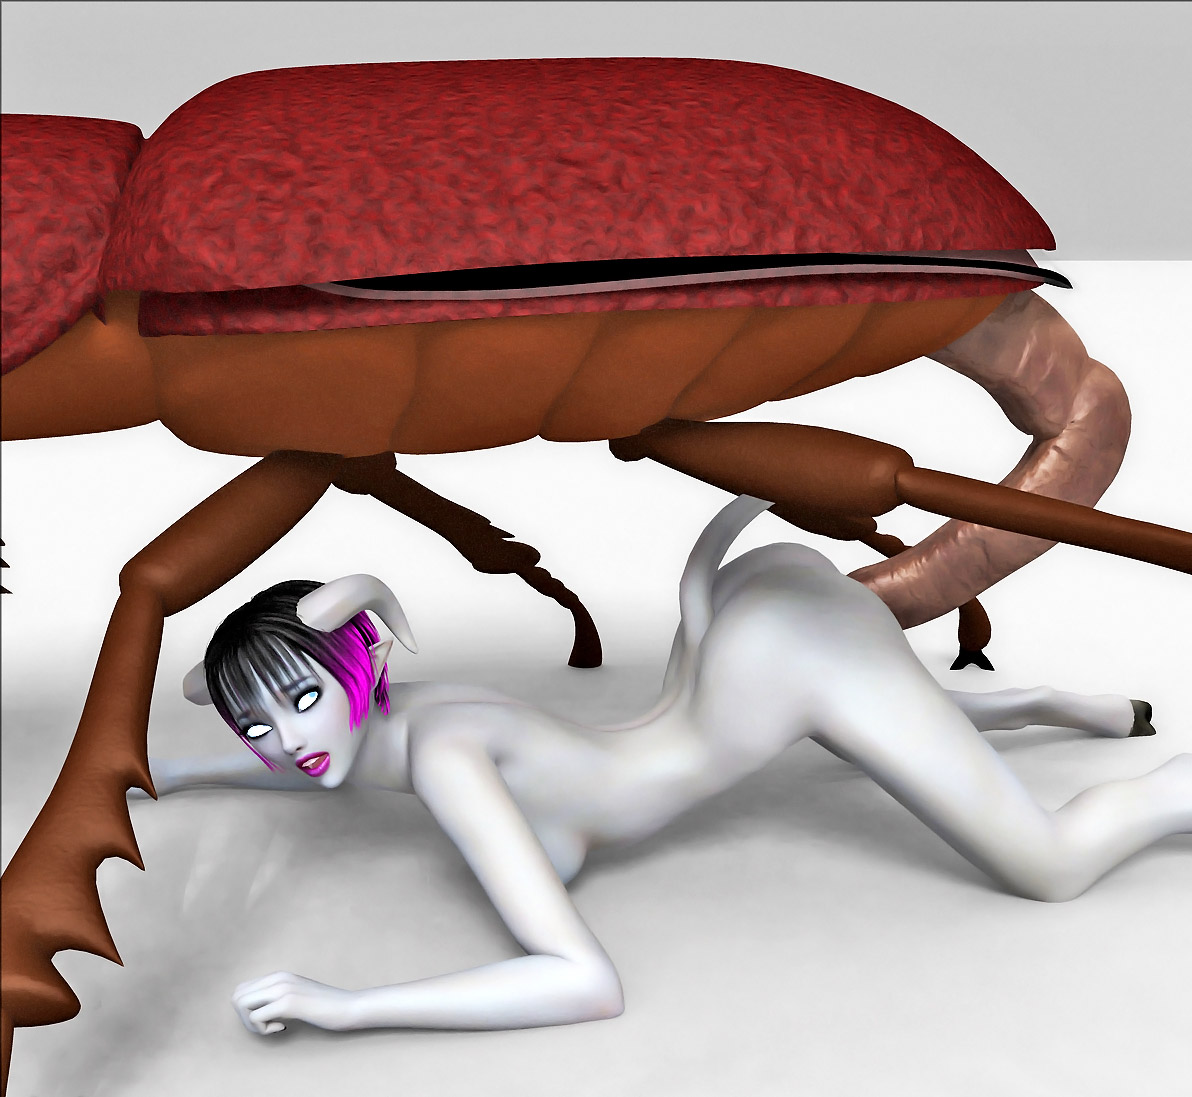 Hot Girls Fucking Monsters - Sexy horned elf girl getting fucked by an enormous bug monster at  3dEvilMonsters